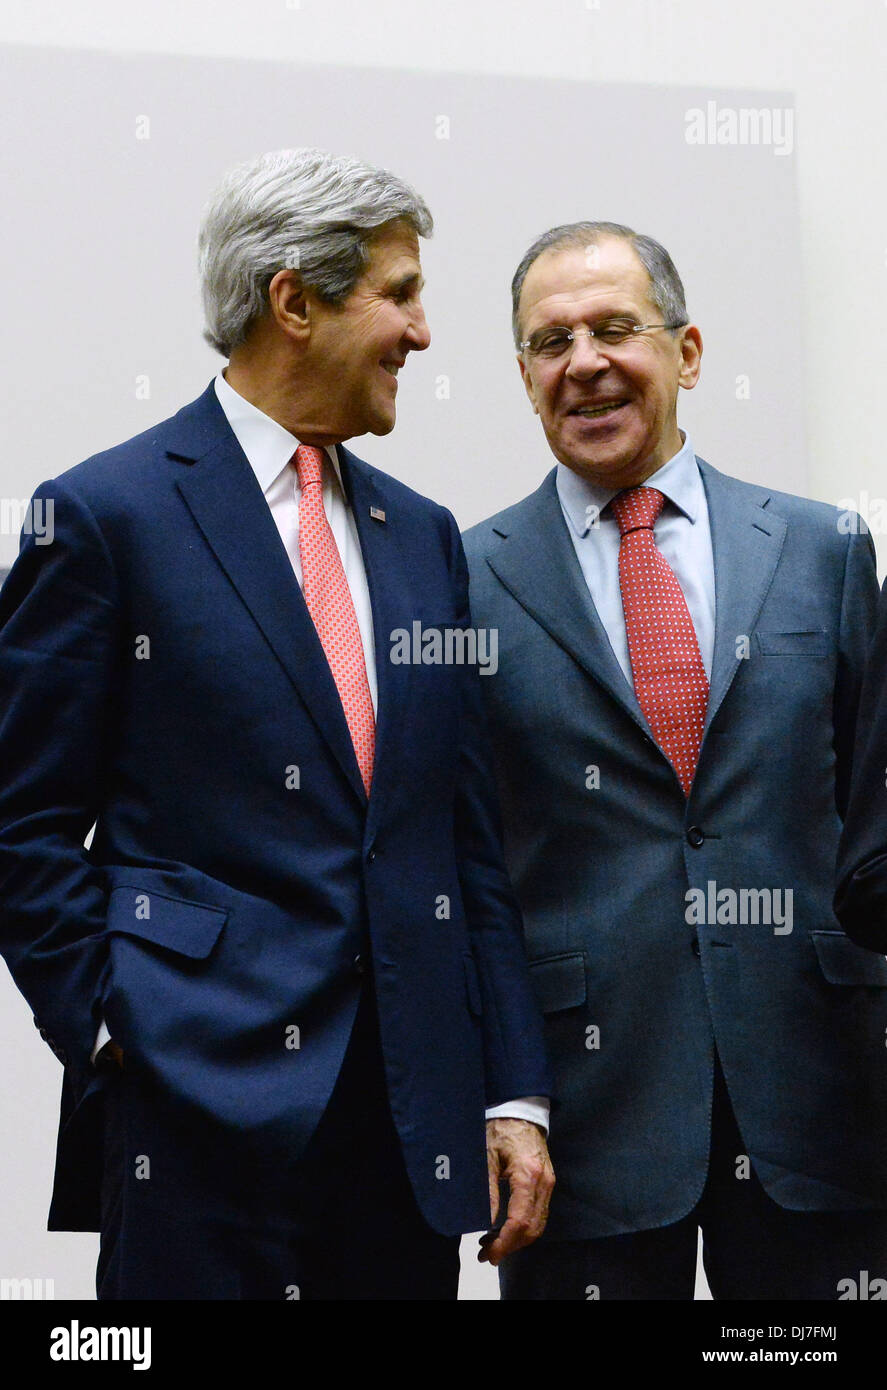 Geneva, Switzerland. 24th Nov, 2013. U.S. Secretary of State John Kerry (L) talks with Russian Foreign Minister Sergei Lavrov after a statement in Geneva, Switzerland, Nov. 24, 2013. After intensive negotiations, the P5 1 group and Iran have reached a first-step agreement on Iran's nuclear program, EU foreign policy chief Catherine Ashton announced early Sunday morning. Credit:  Wang Siwei/Xinhua/Alamy Live News Stock Photo